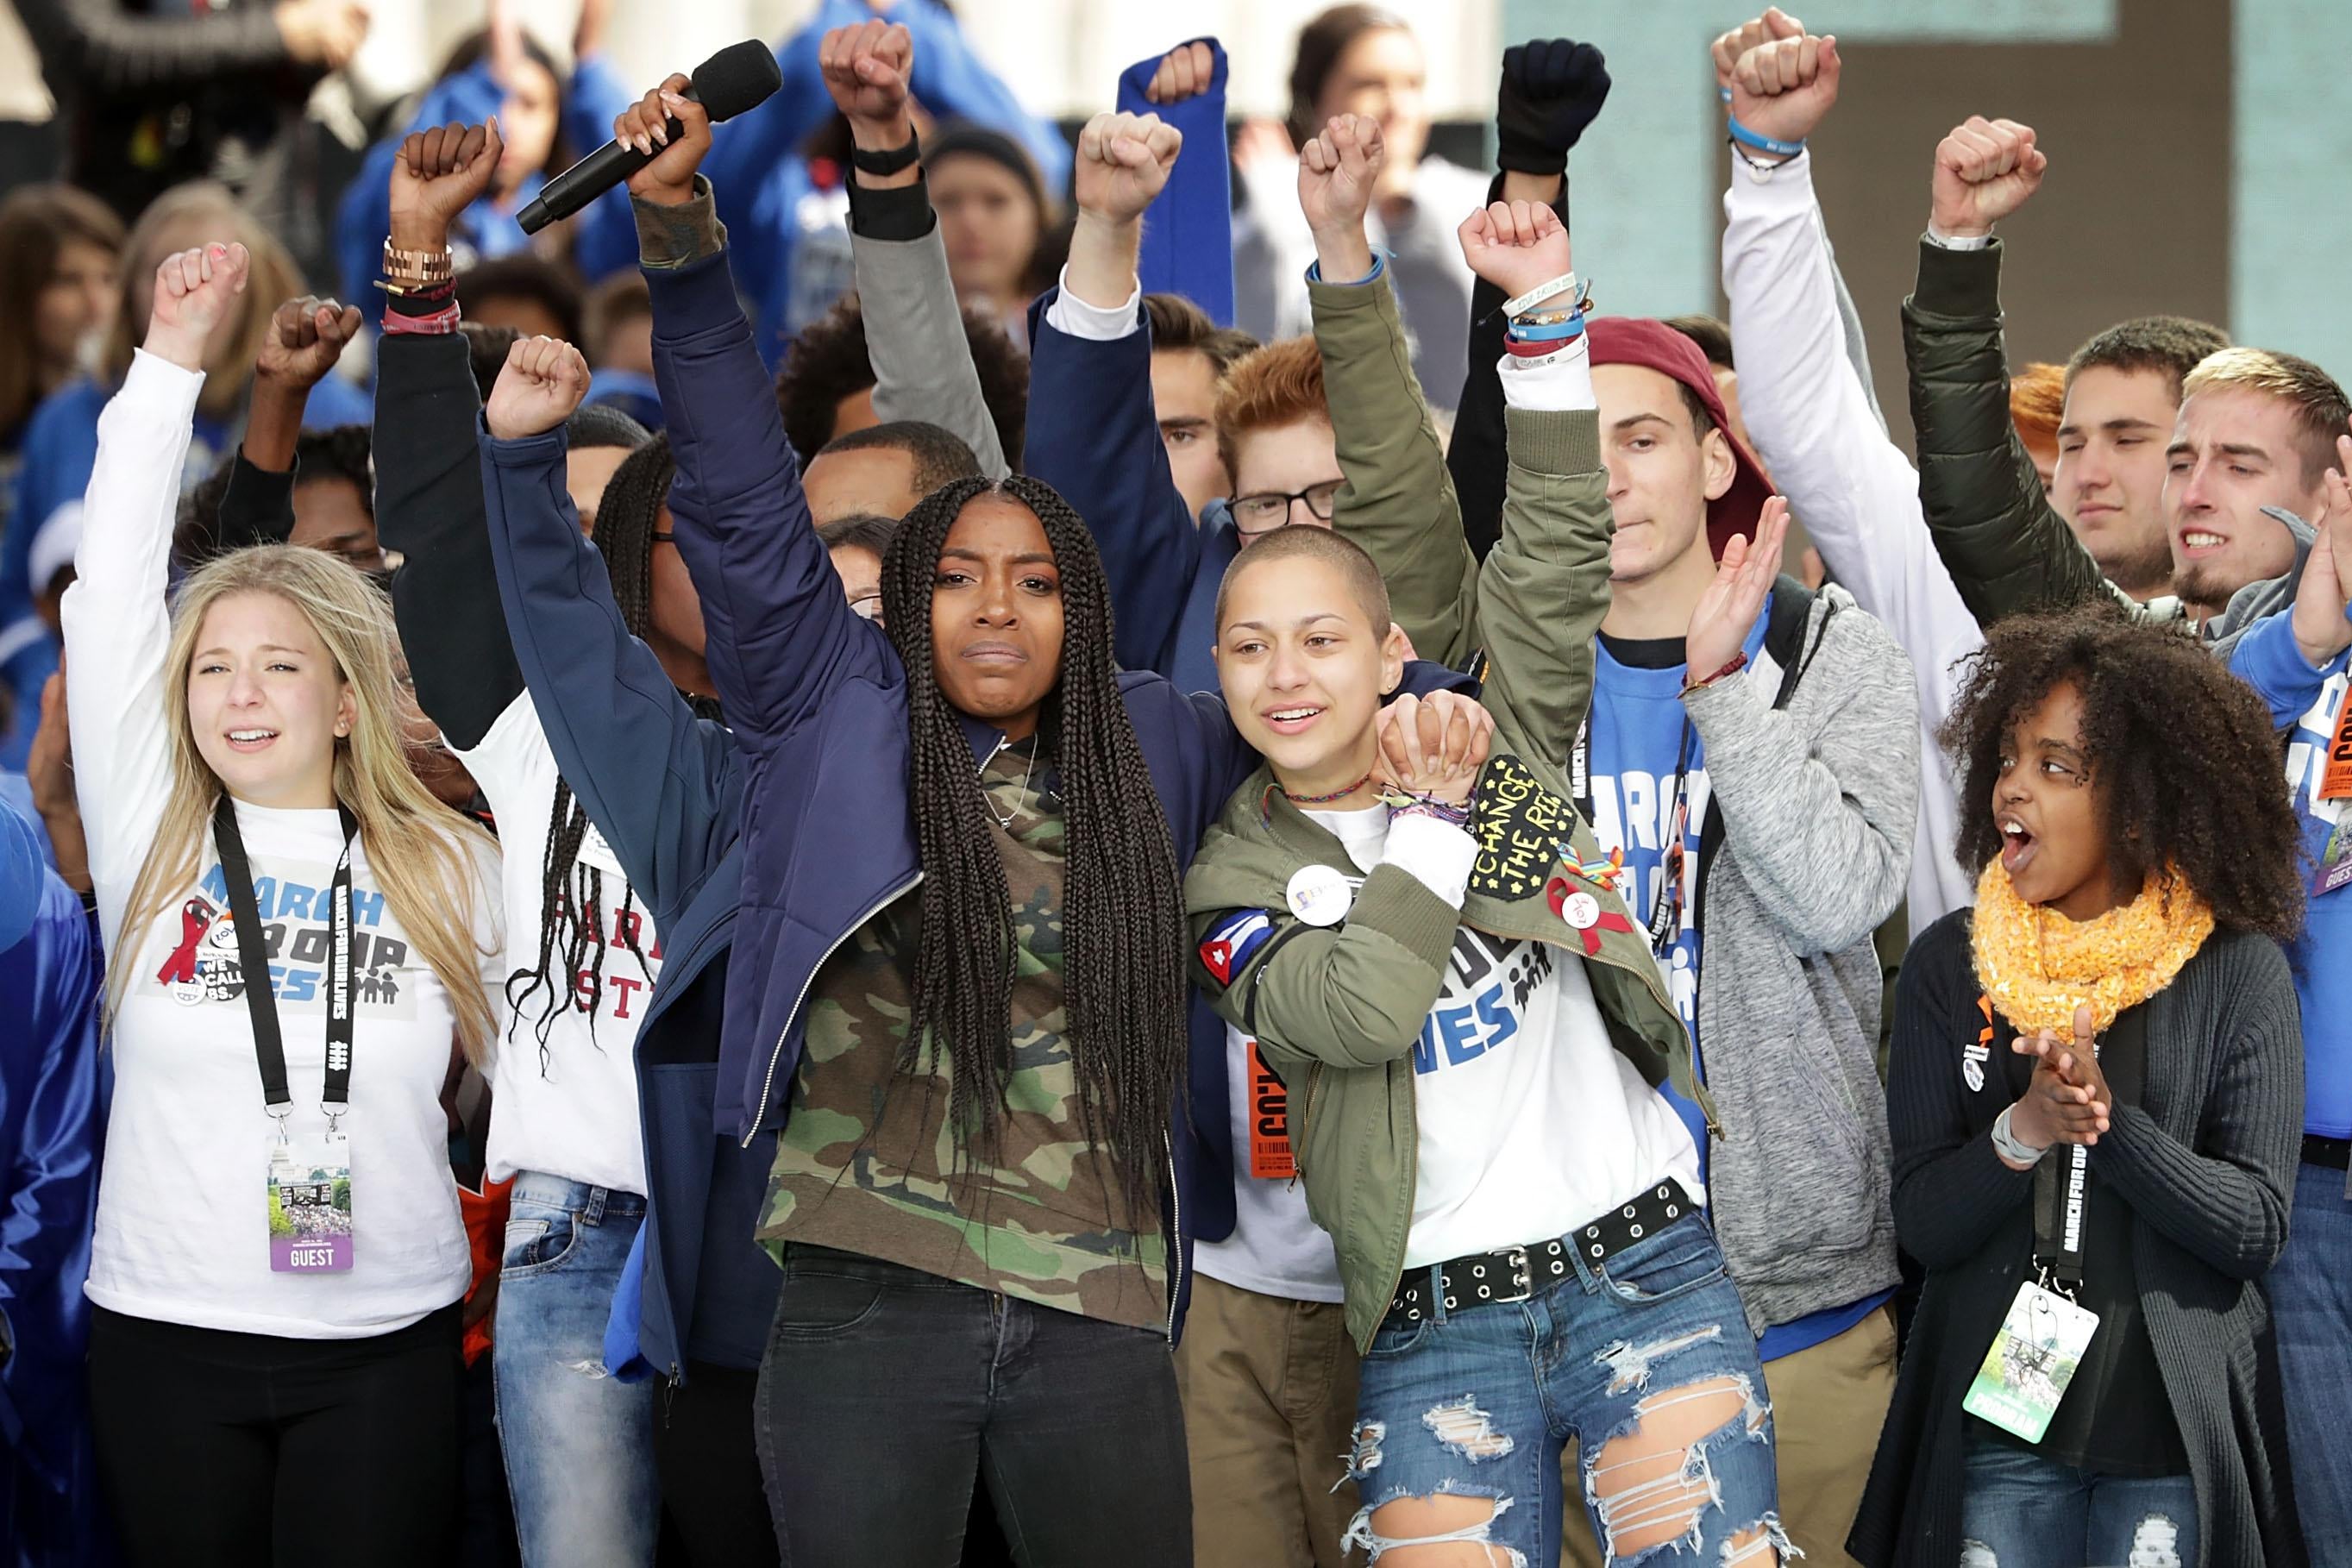 WASHINGTON, DC - MARCH 24:  Students from Marjory Stoneman Douglas High School, including Emma Gonzalez (C), stand together on stage with other young victims of gun violence at the conclusion of the March for Our Lives rally on March 24, 2018 in Washington, DC. Hundreds of thousands of demonstrators, including students, teachers and parents gathered in Washington for the anti-gun violence rally organized by survivors of the Marjory Stoneman Douglas High School shooting on February 14 that left 17 dead. More than 800 related events are taking place around the world to call for legislative action to address school safety and gun violence.  (Photo by Chip Somodevilla/Getty Images)